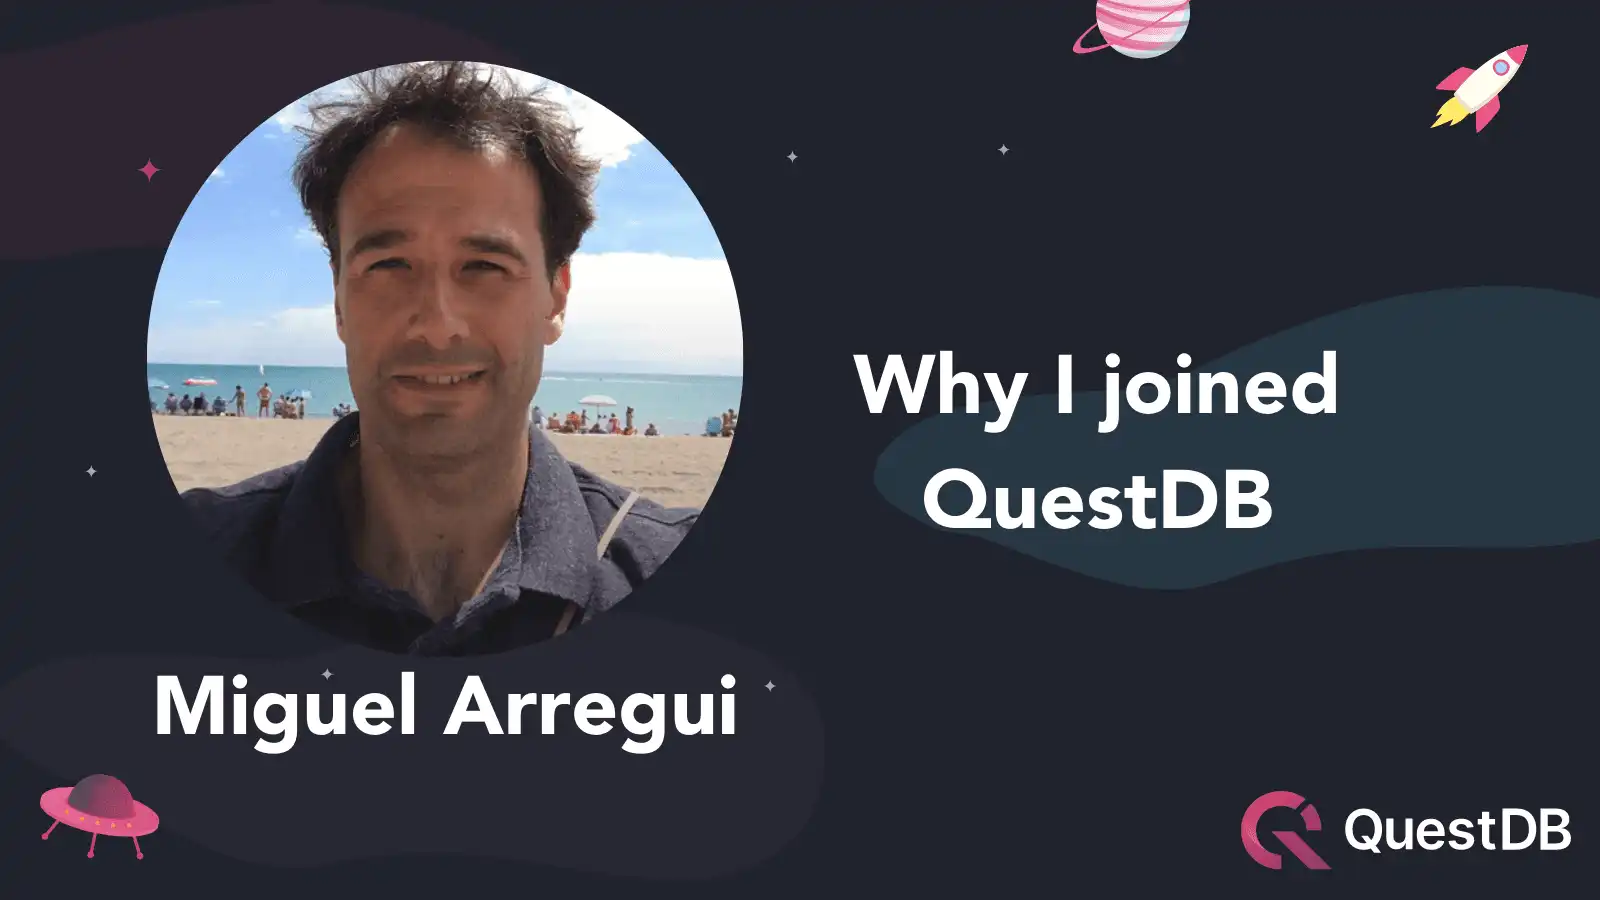 A graphic with a photo of Miguel Arregui, software engineer at QuestDB